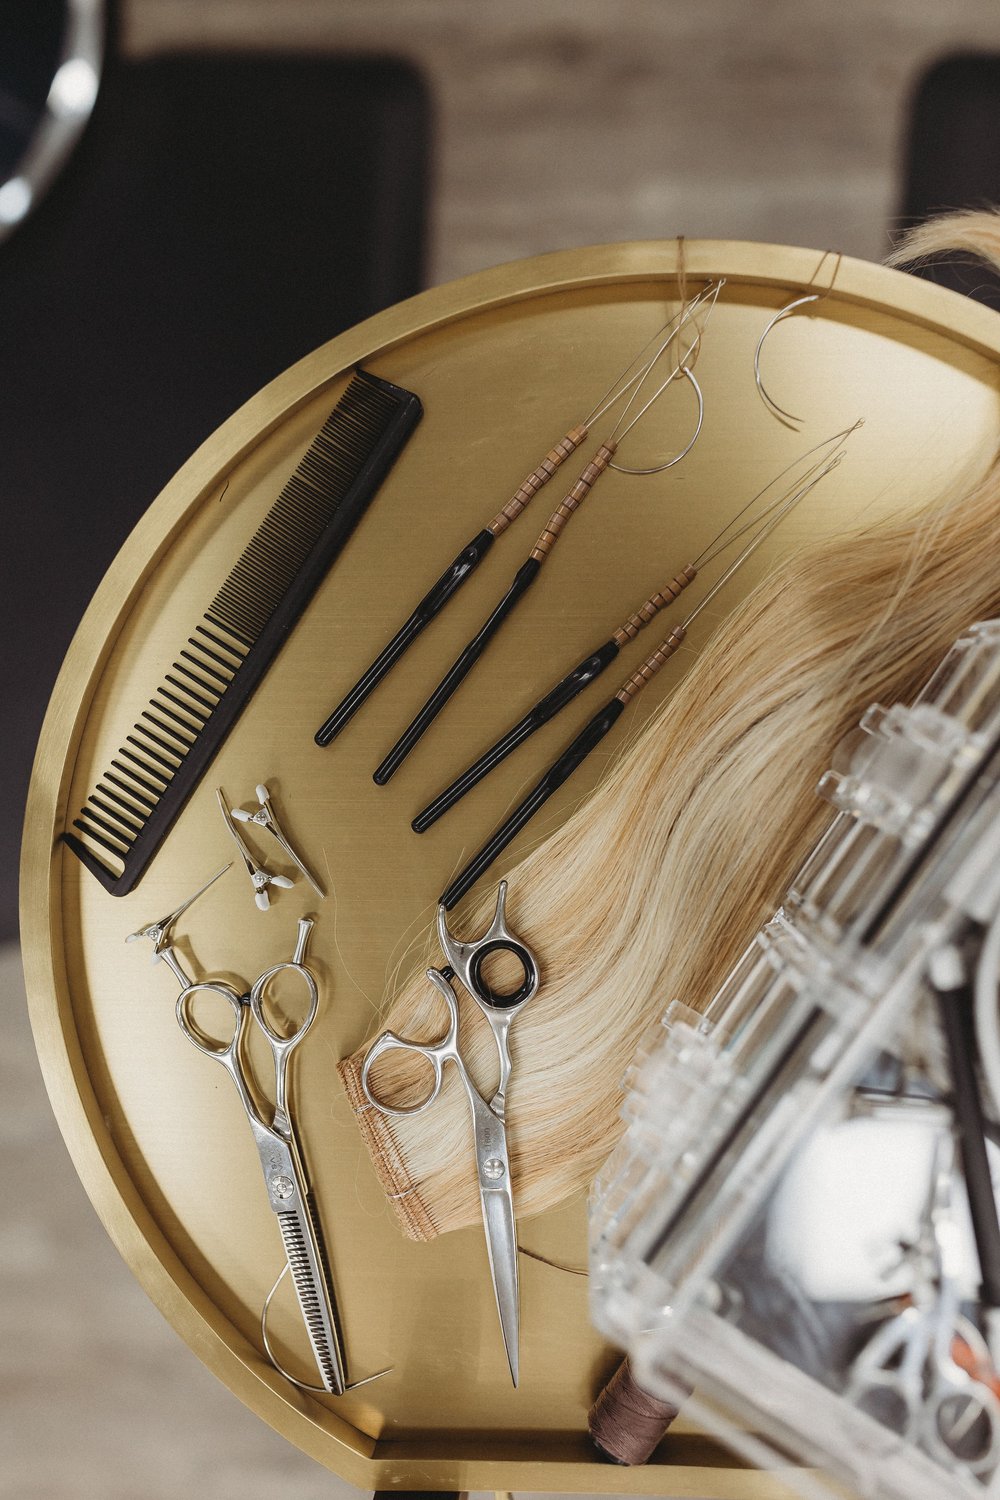  hair extension tools sit on a gold tray during a stylist photoshoot 